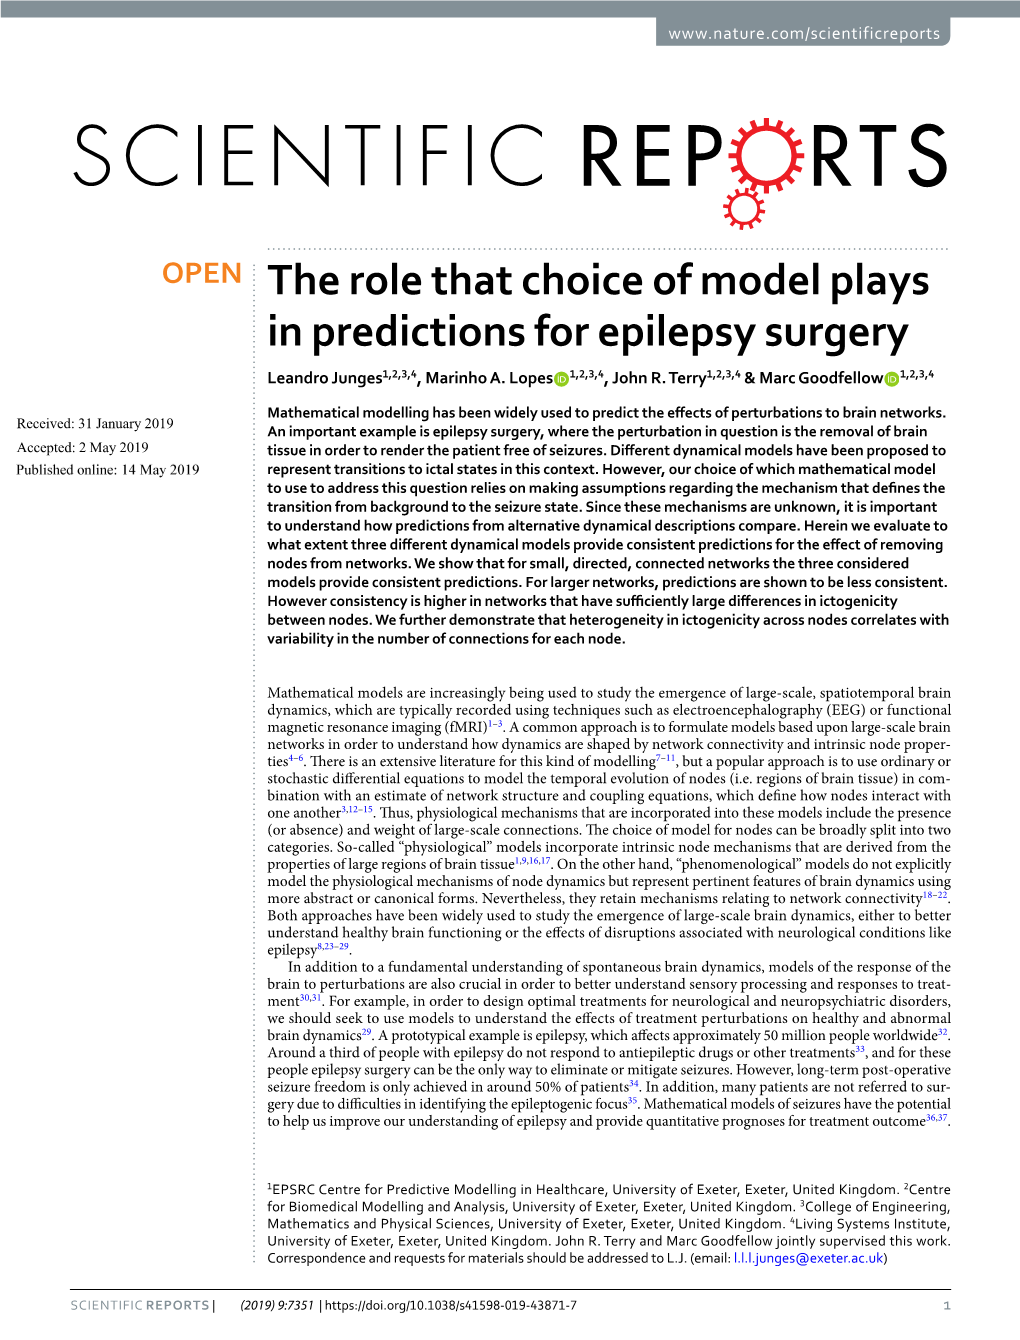 The Role That Choice of Model Plays in Predictions for Epilepsy Surgery Leandro Junges1,2,3,4, Marinho A